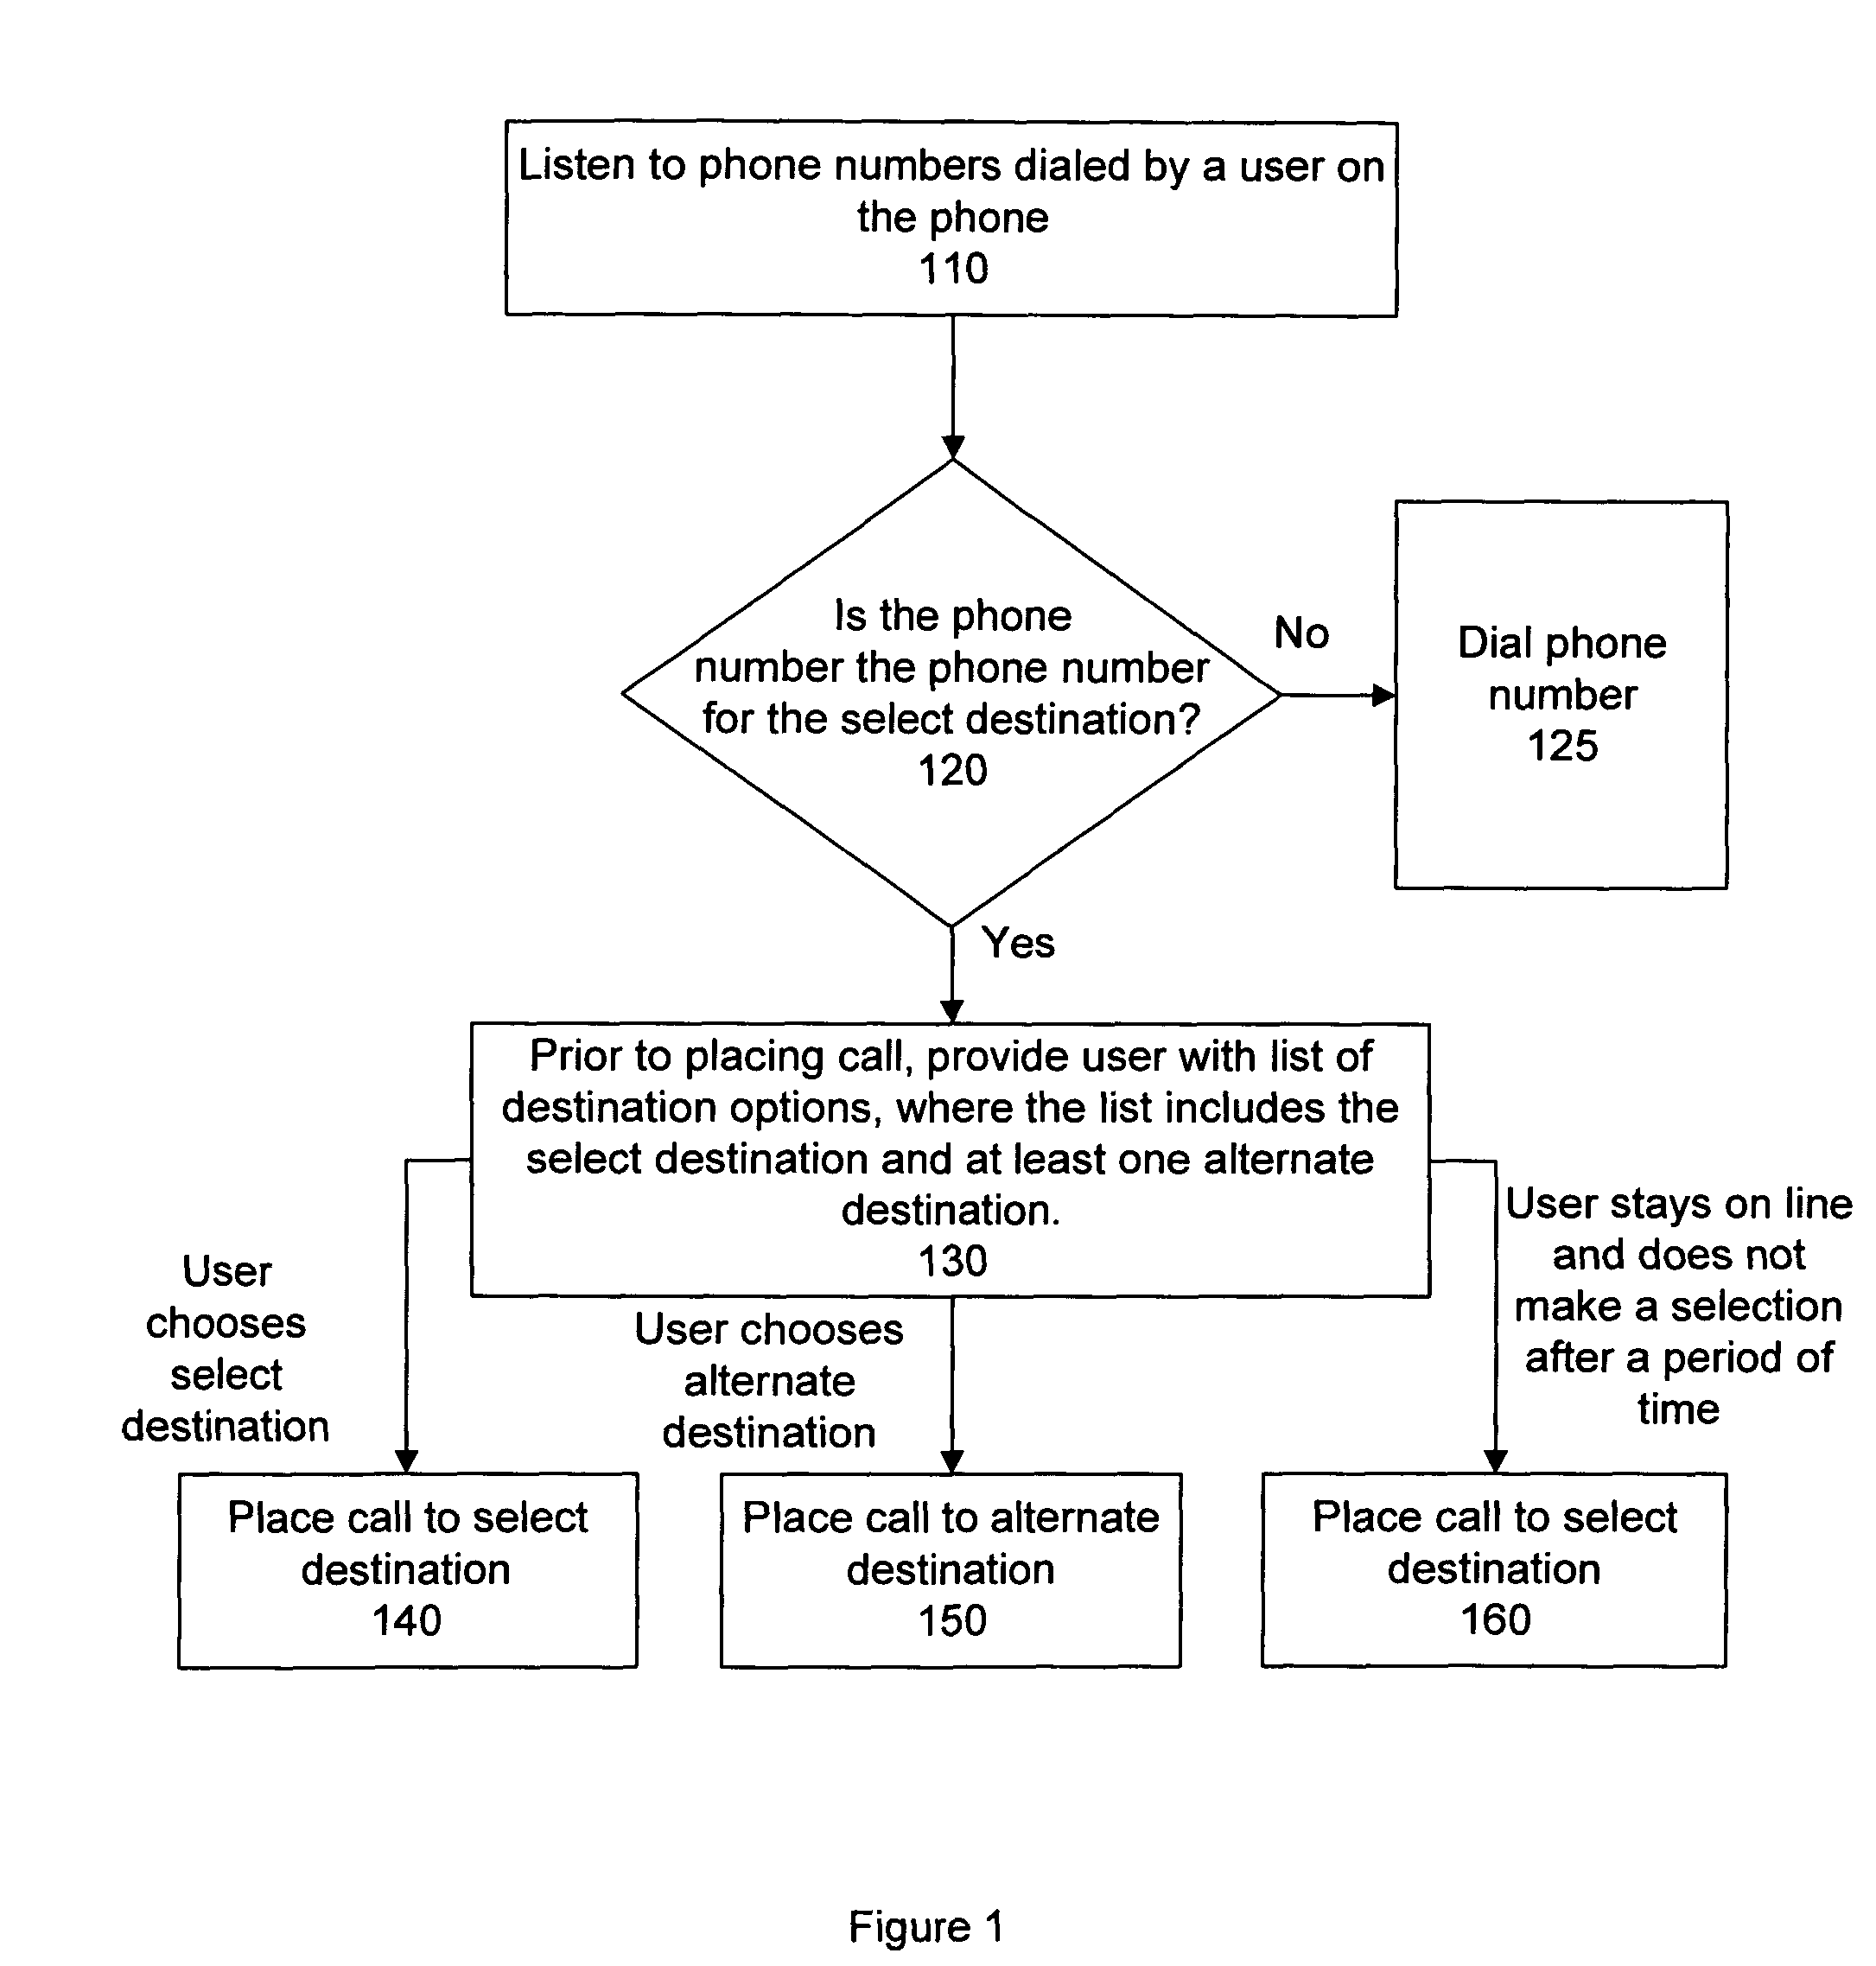 Software program and method for reducing misdirected calls to a select destination